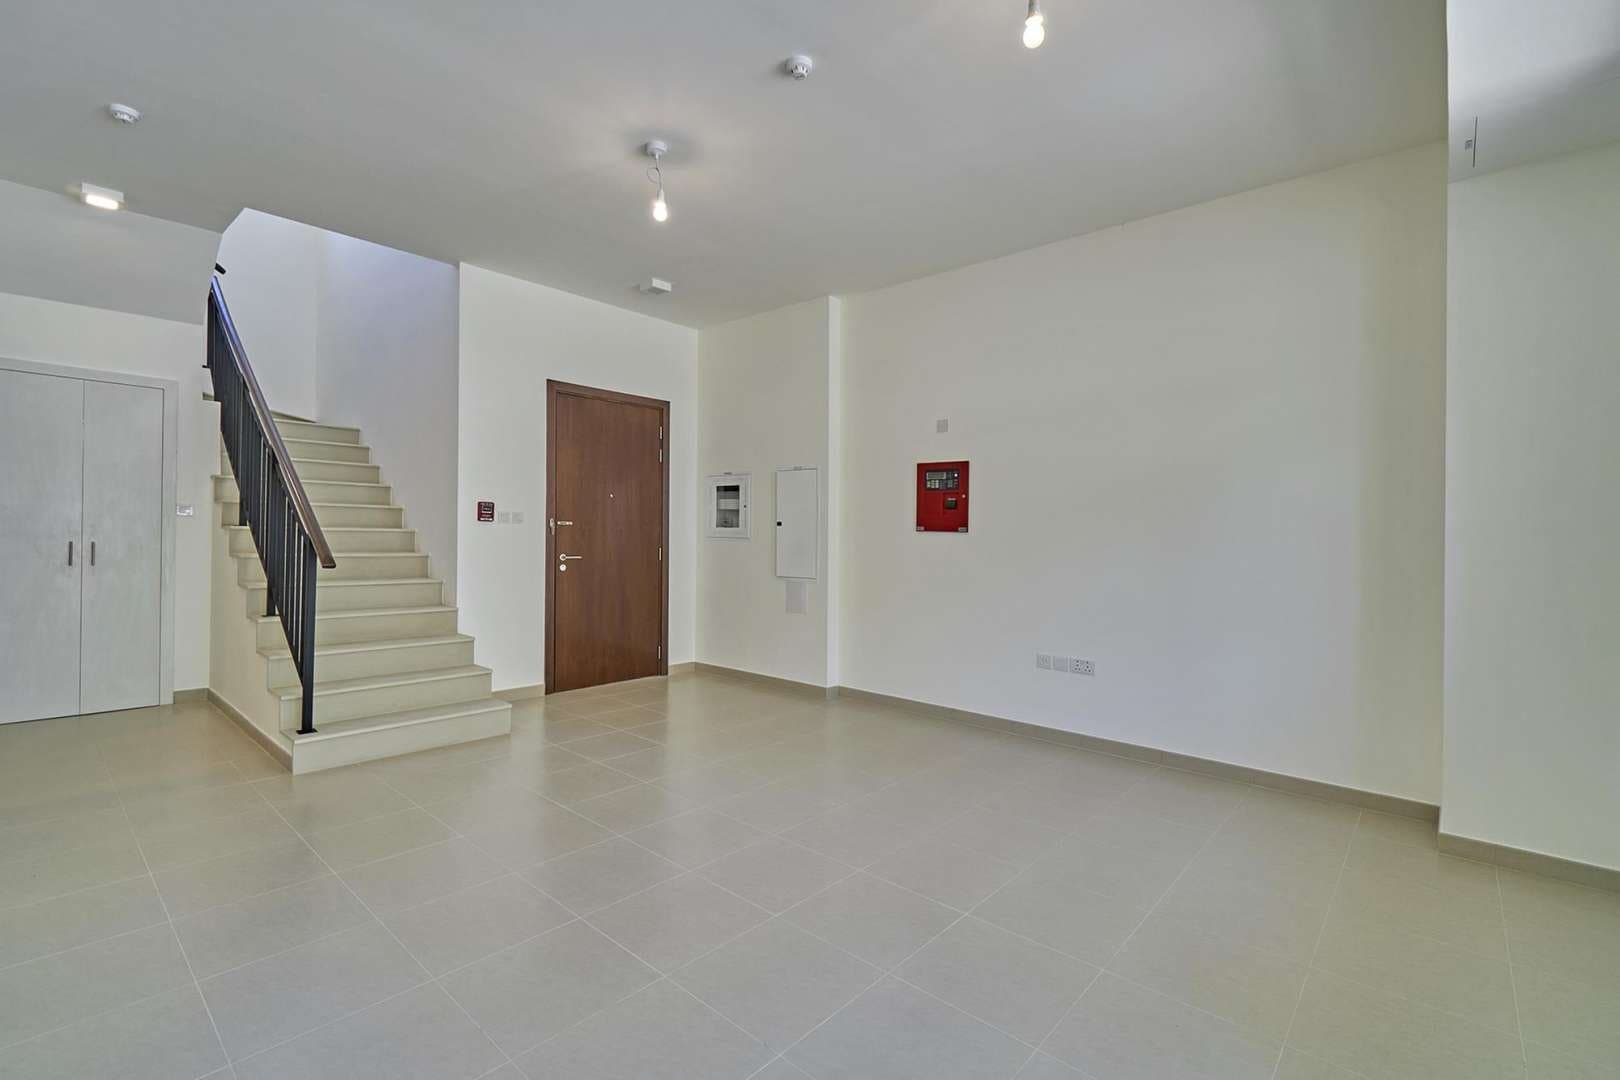 3 Bedroom Townhouse For Rent Naseem Townhouses Lp06414 203d8caed0915200.jpg